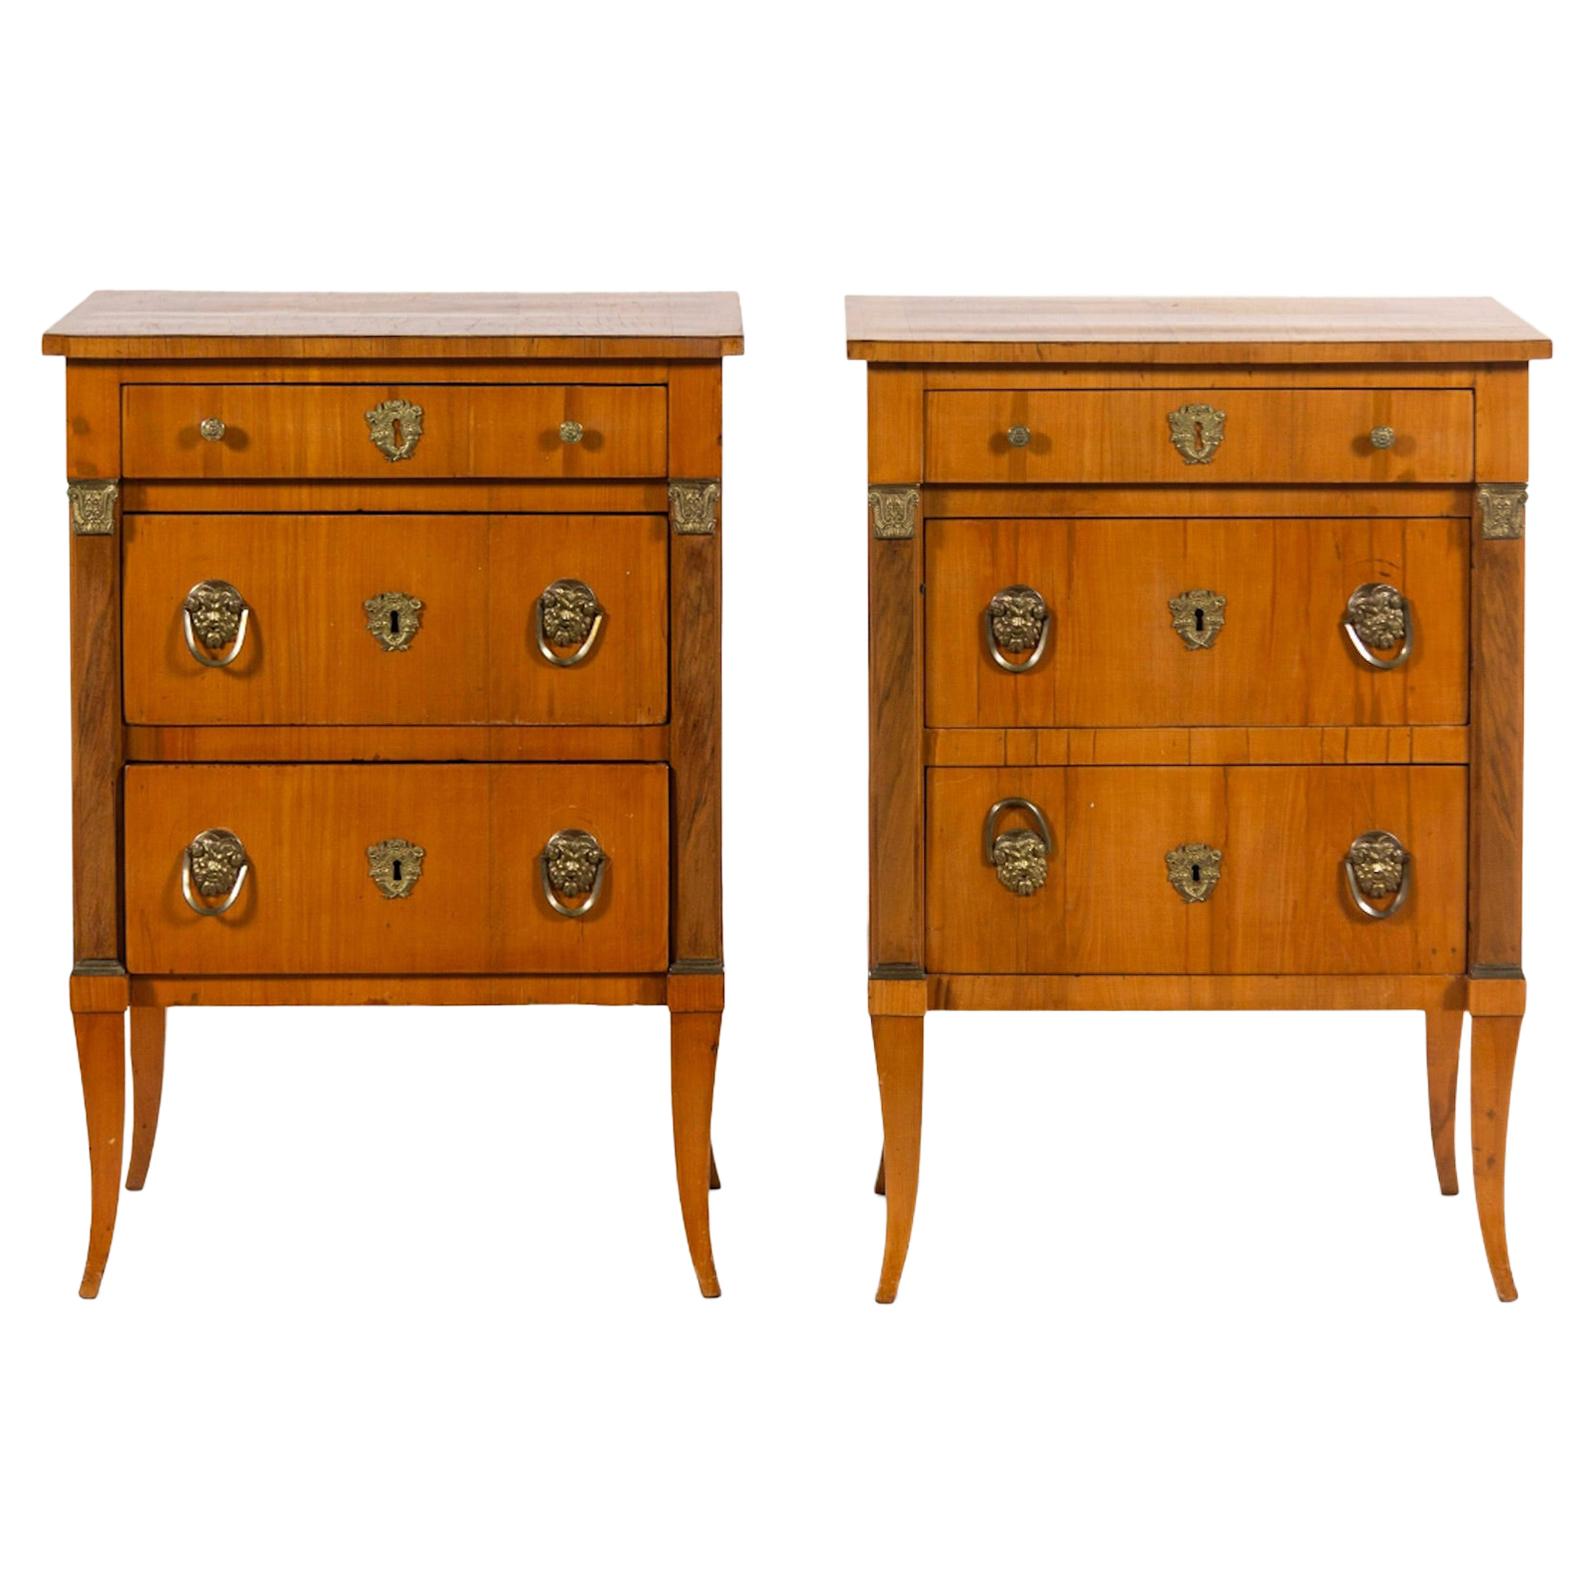 A Pair of Continental Bronze Mounted Birch Side Tables, Pristine Condition.